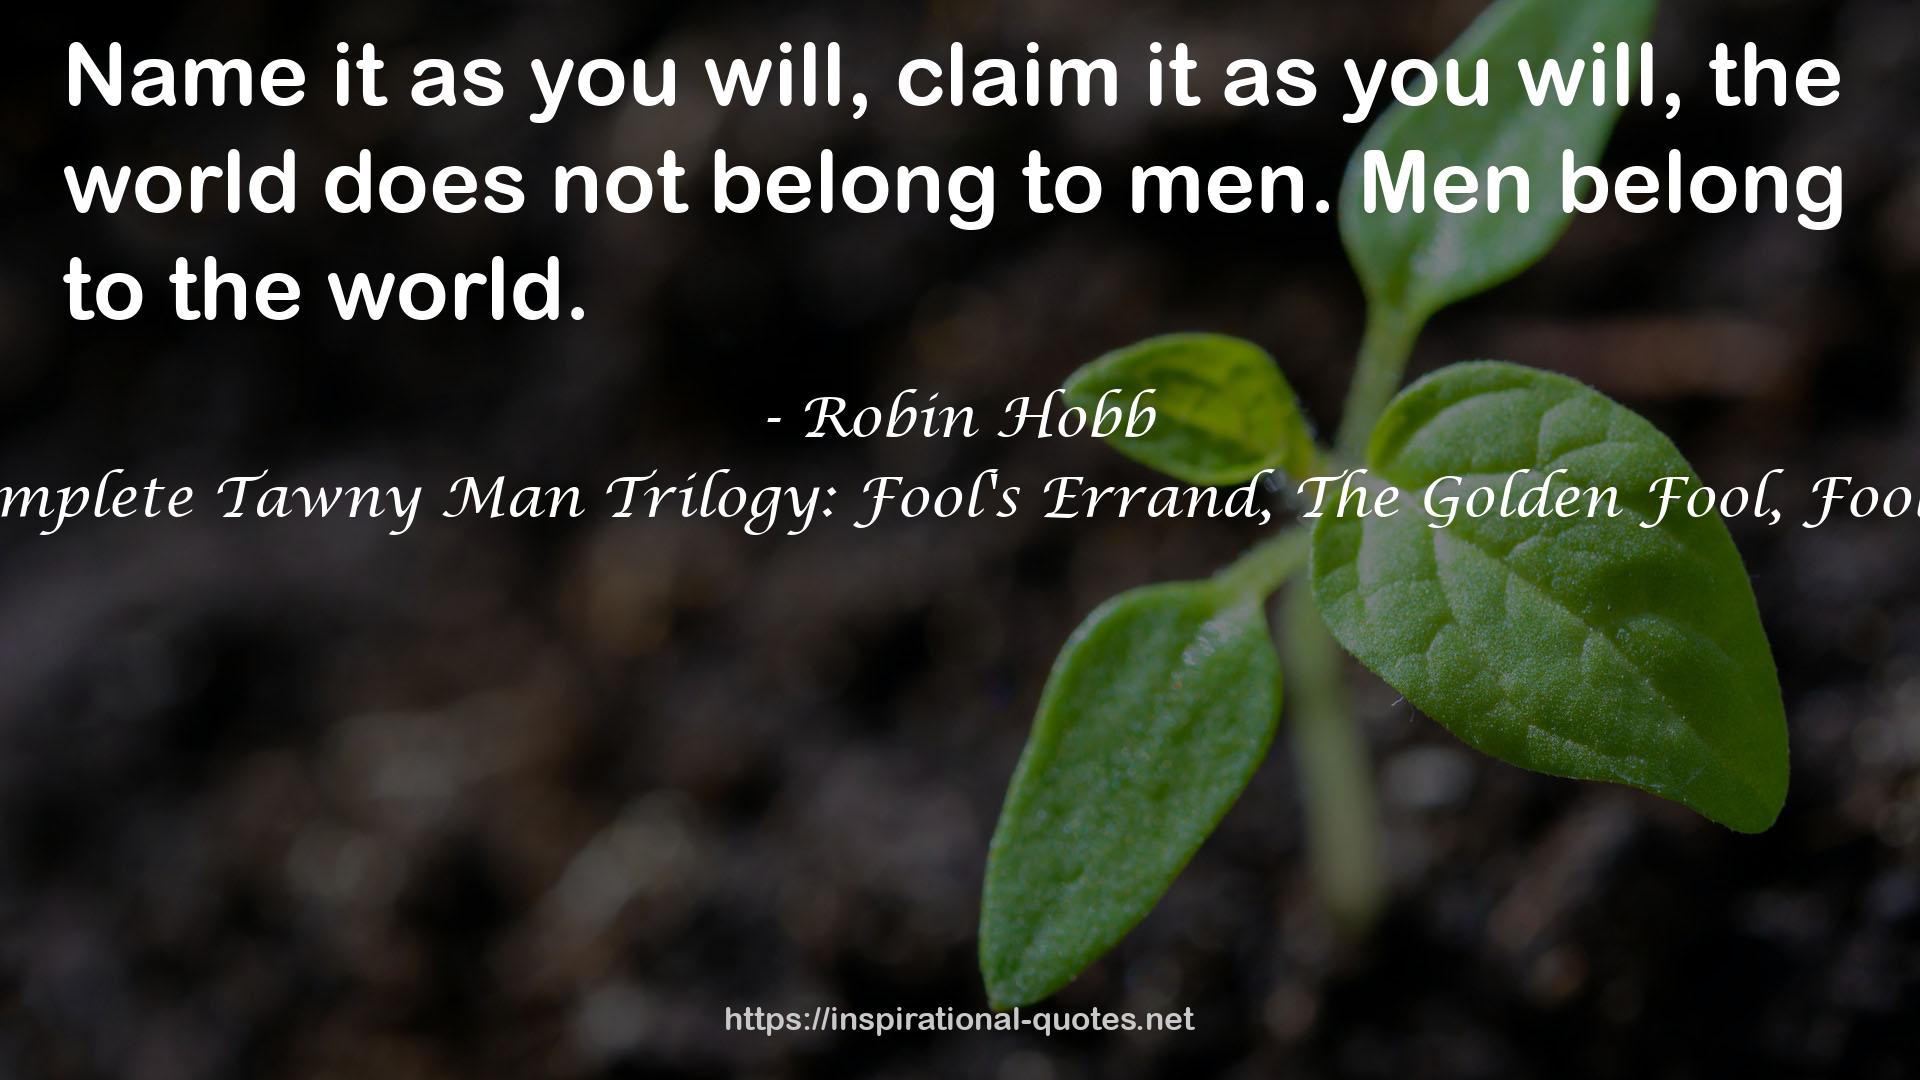 The Complete Tawny Man Trilogy: Fool's Errand, The Golden Fool, Fool's Fate QUOTES